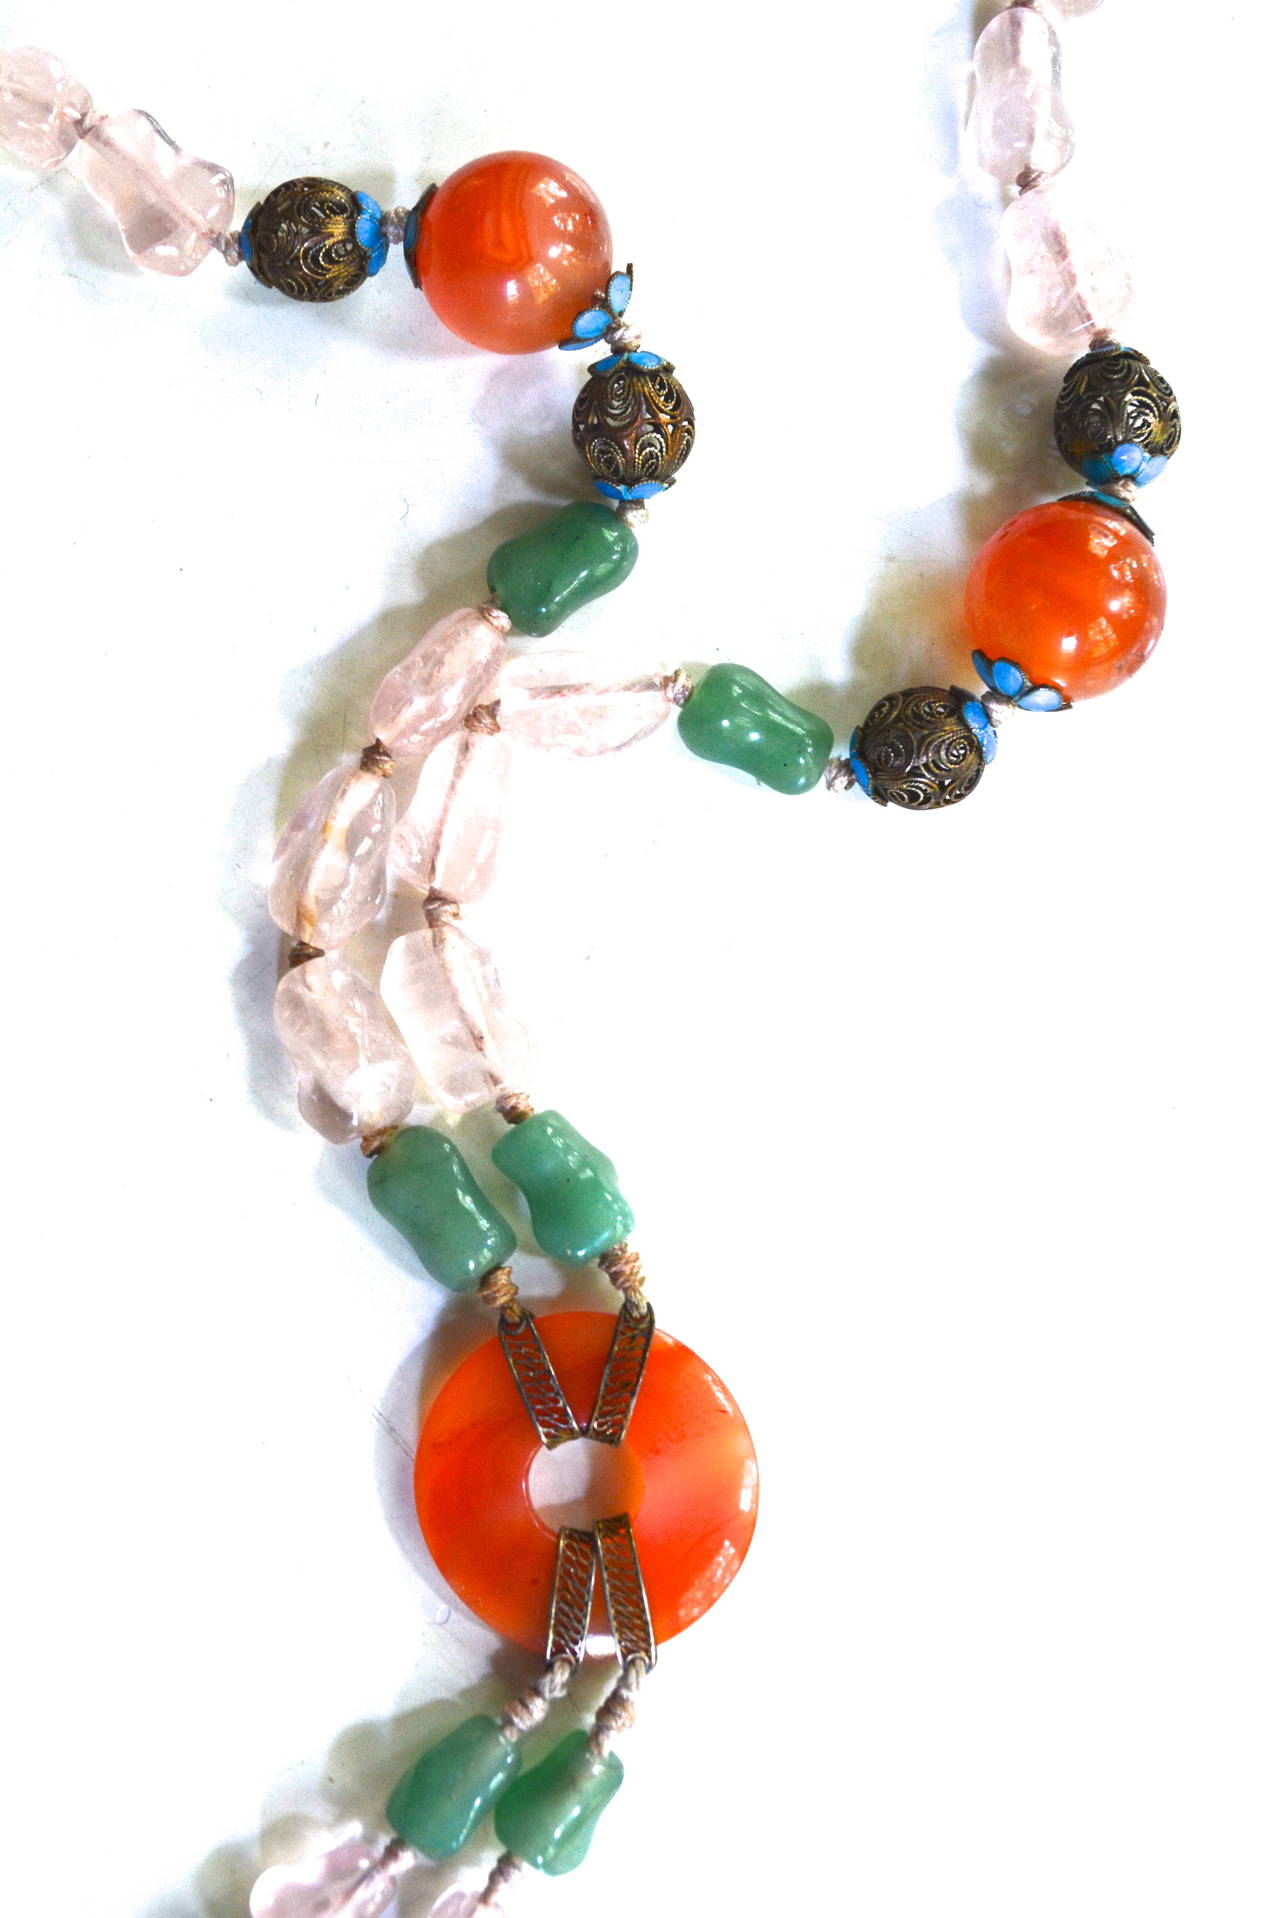 Chinese silver and gemstone knotted necklace. Featuring carnelian, blue enamel, jade and pink quartz. Pendant design drops 5.5" from 30 gemstone collar. Width varies with the center carnelian piece being 1" wide.